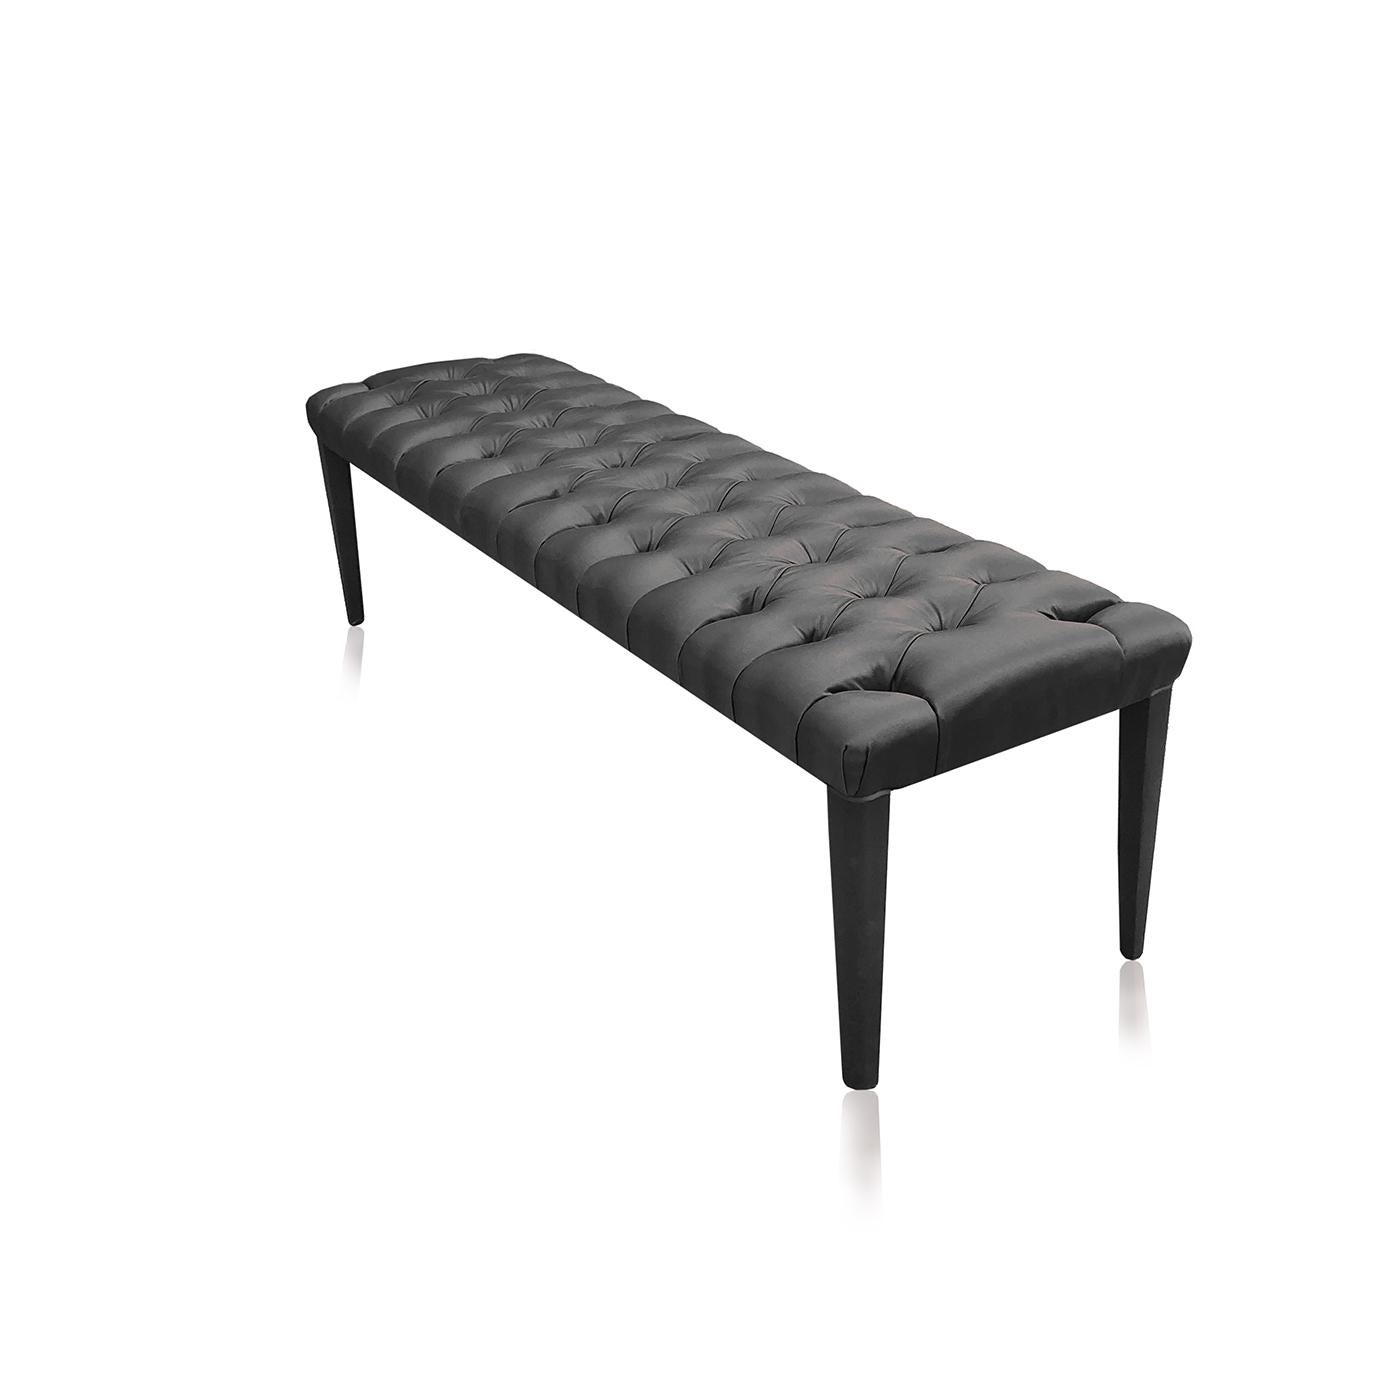 Perfect for perching on at the end of a bed or for simply relaxing, the Farfalla Ottoman Bench in Gray by Davide Barzaghi is firm, comfortable and stunningly elegant. Featuring plush padding, this ottoman bench is fit for royalty. A solid dried